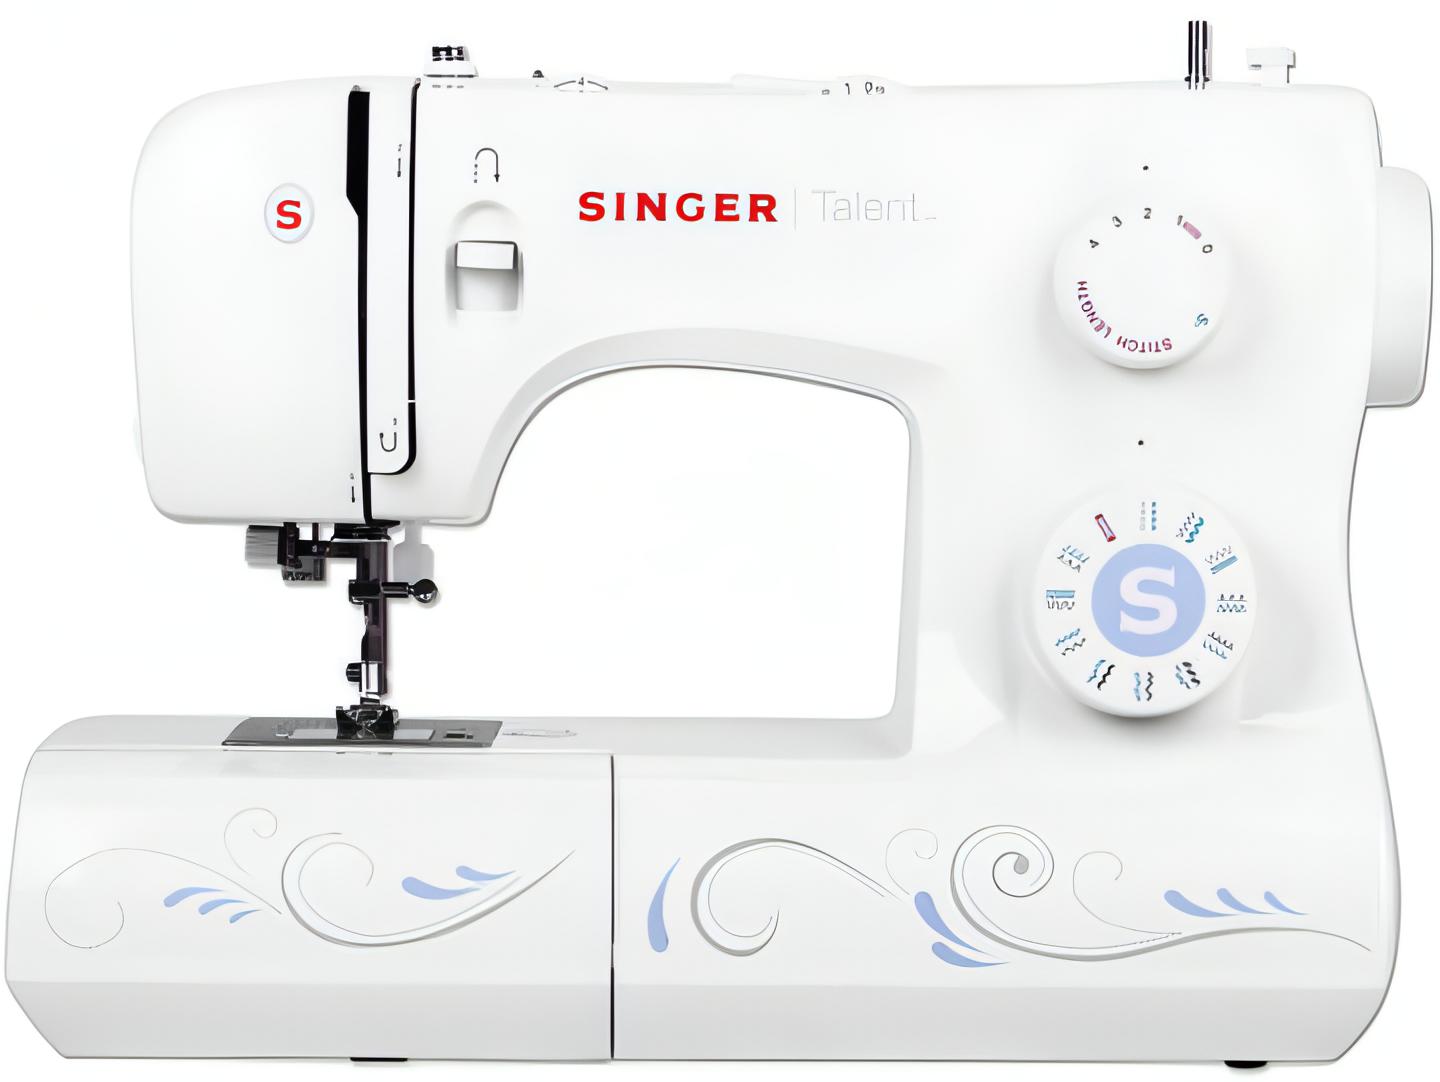 Singer Talent 3323 Sewing Machine - Strong, popular machine with 1 step buttonhole